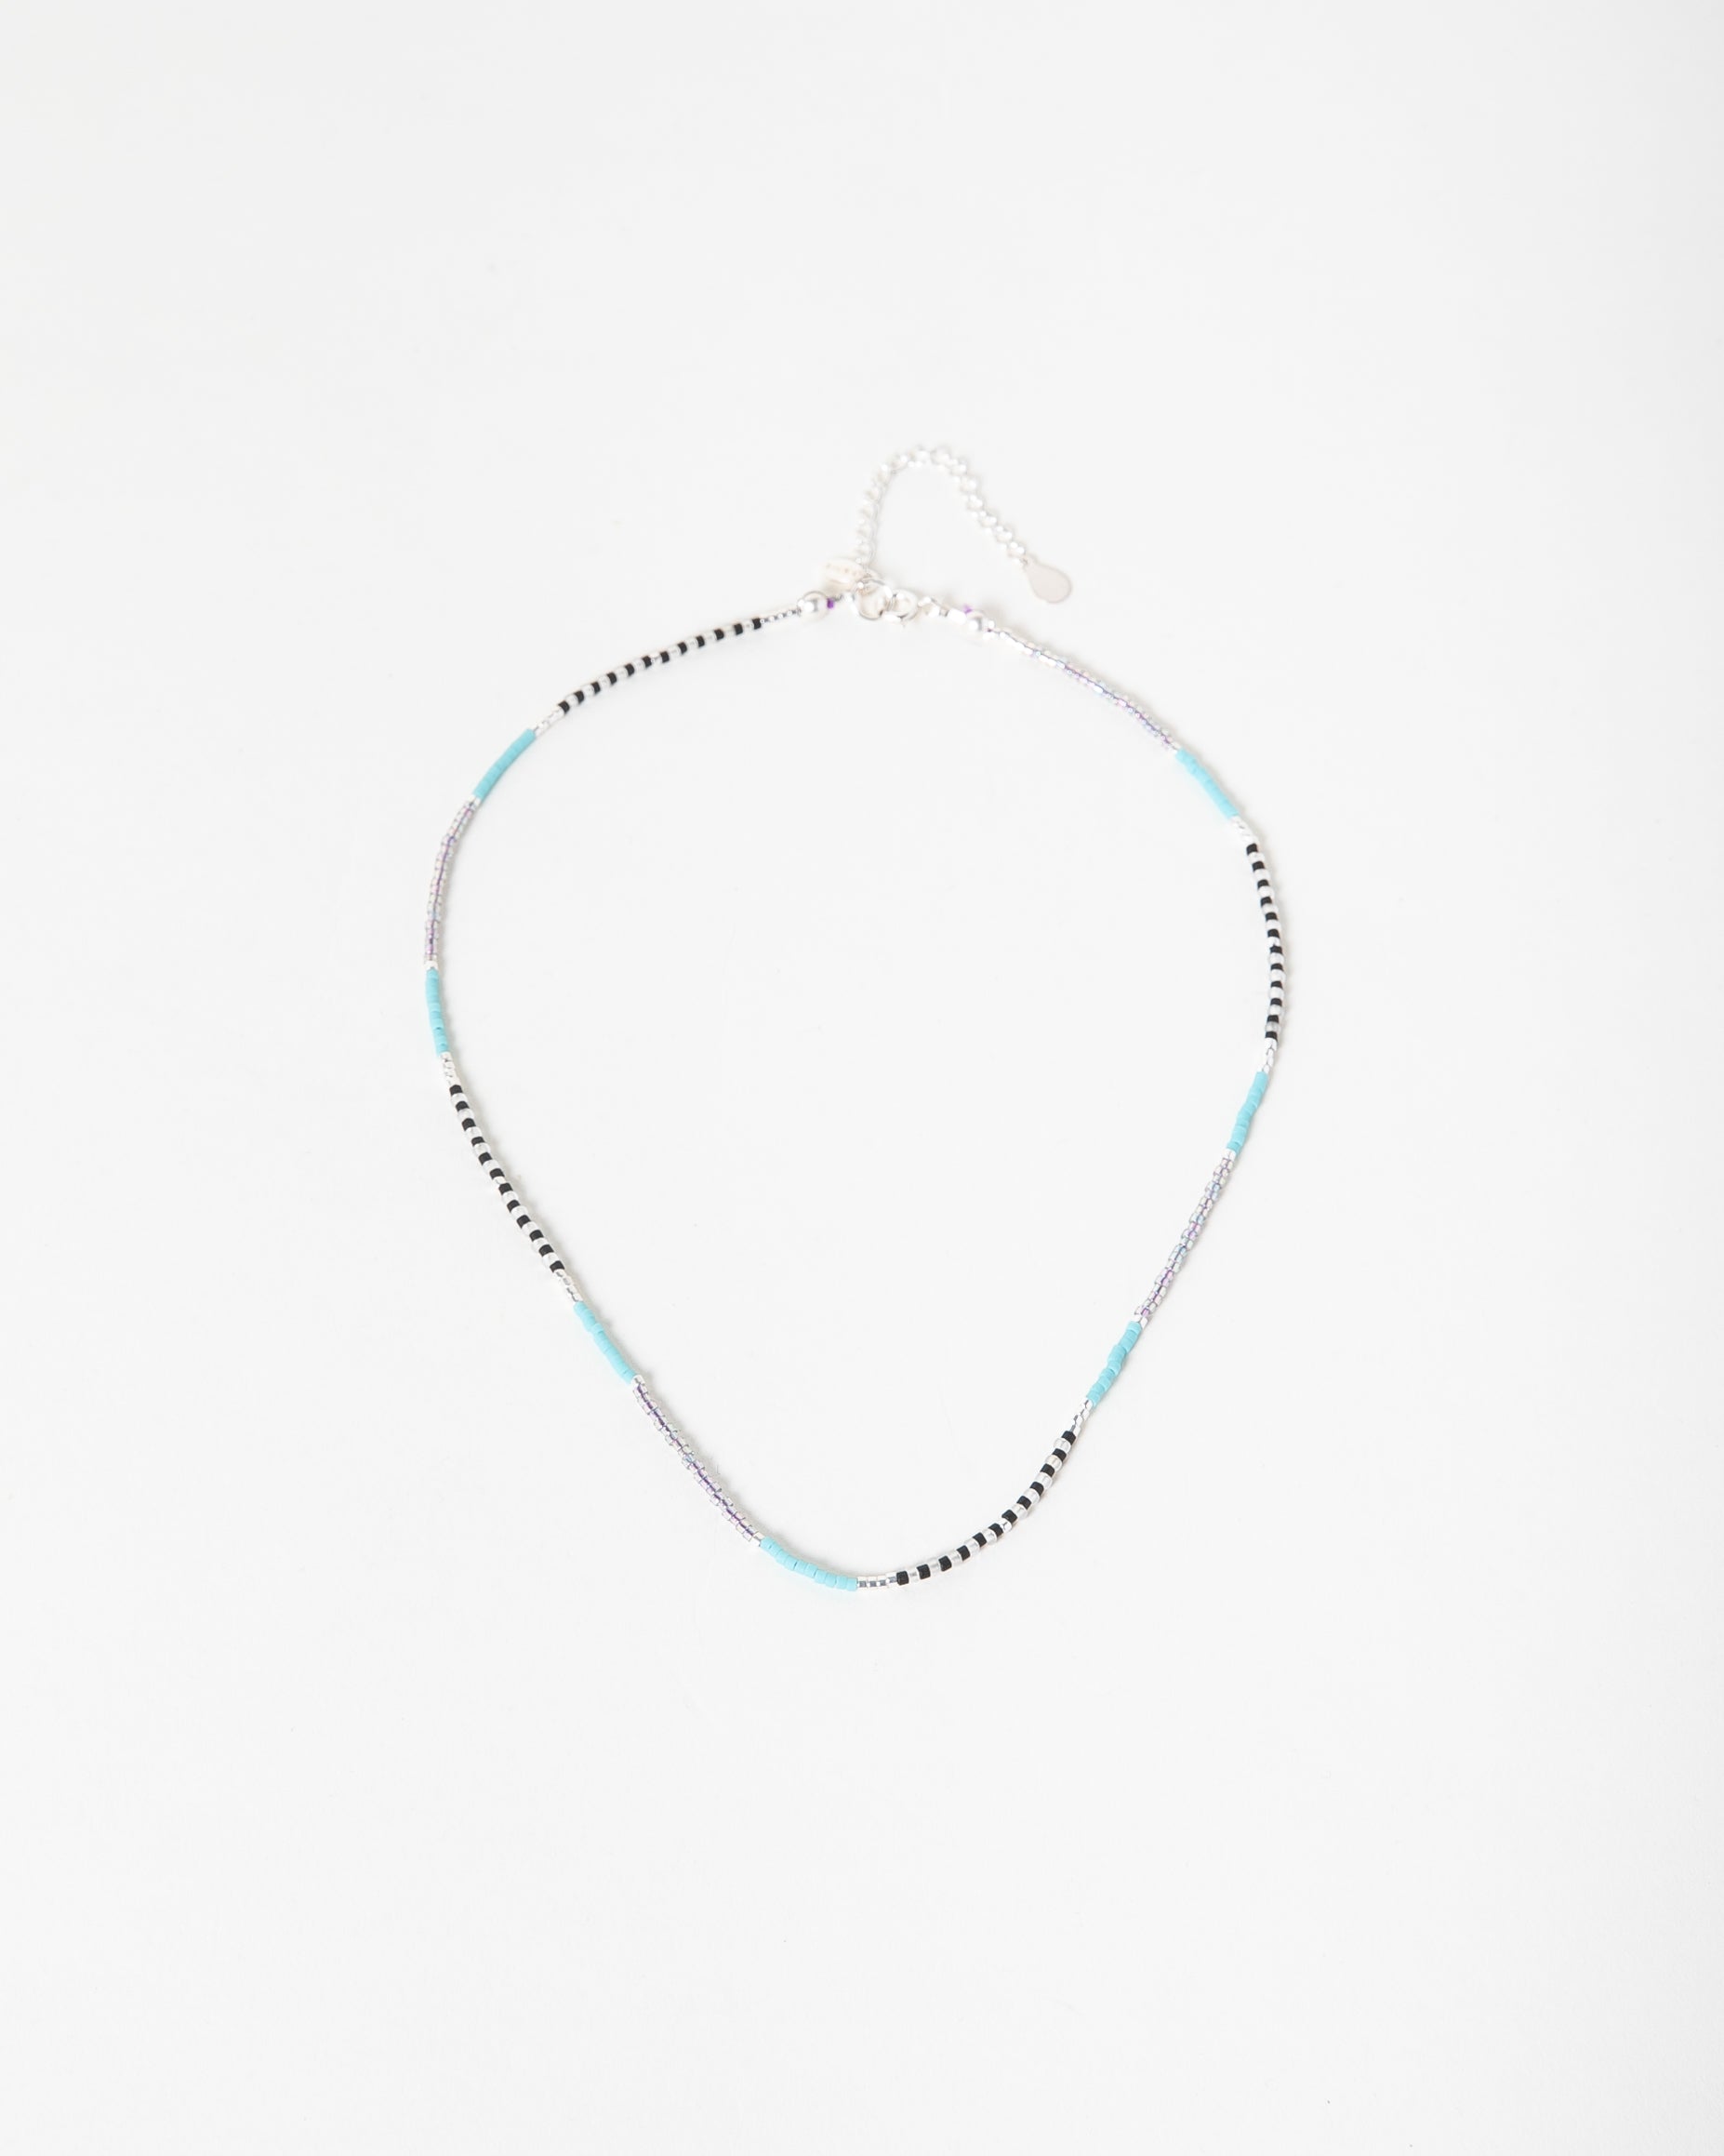 Delicate Miyuki Beaded Necklace in Turquoise and Silver